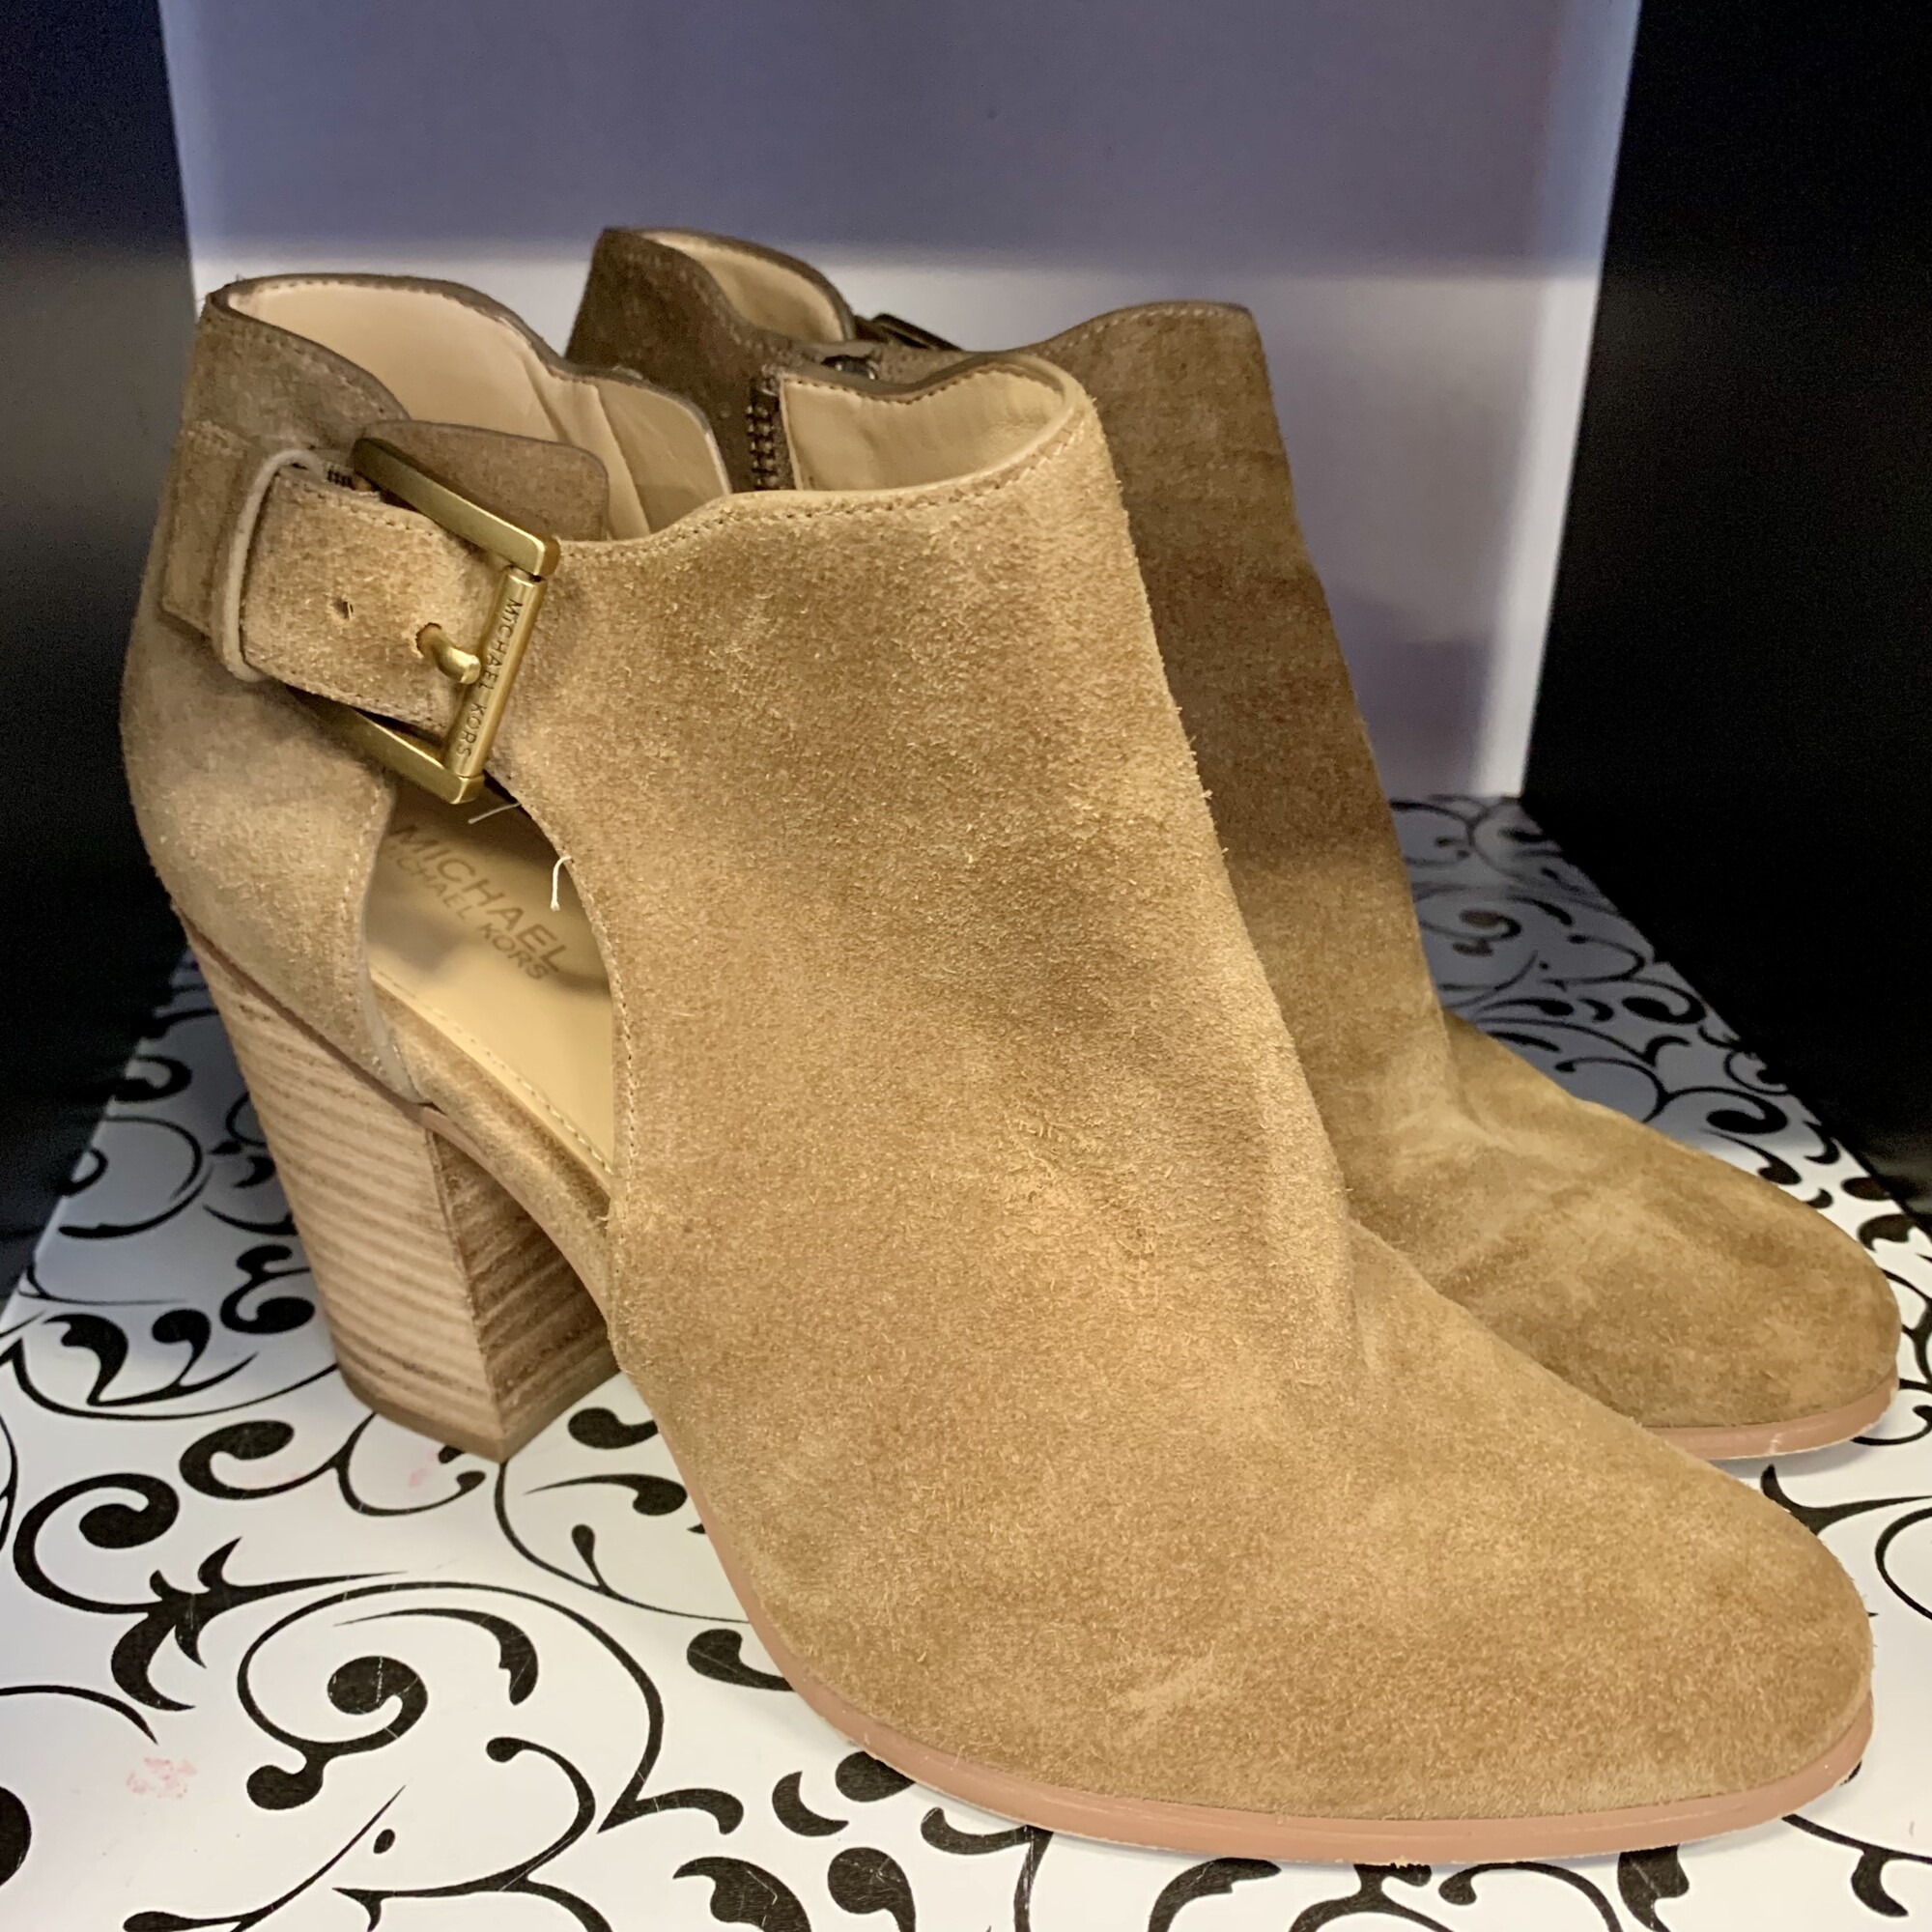 Michael Kors LU Heels,
Colour: Suede Tan,
Size: 9,

Please contact the store if you want this item shipped.